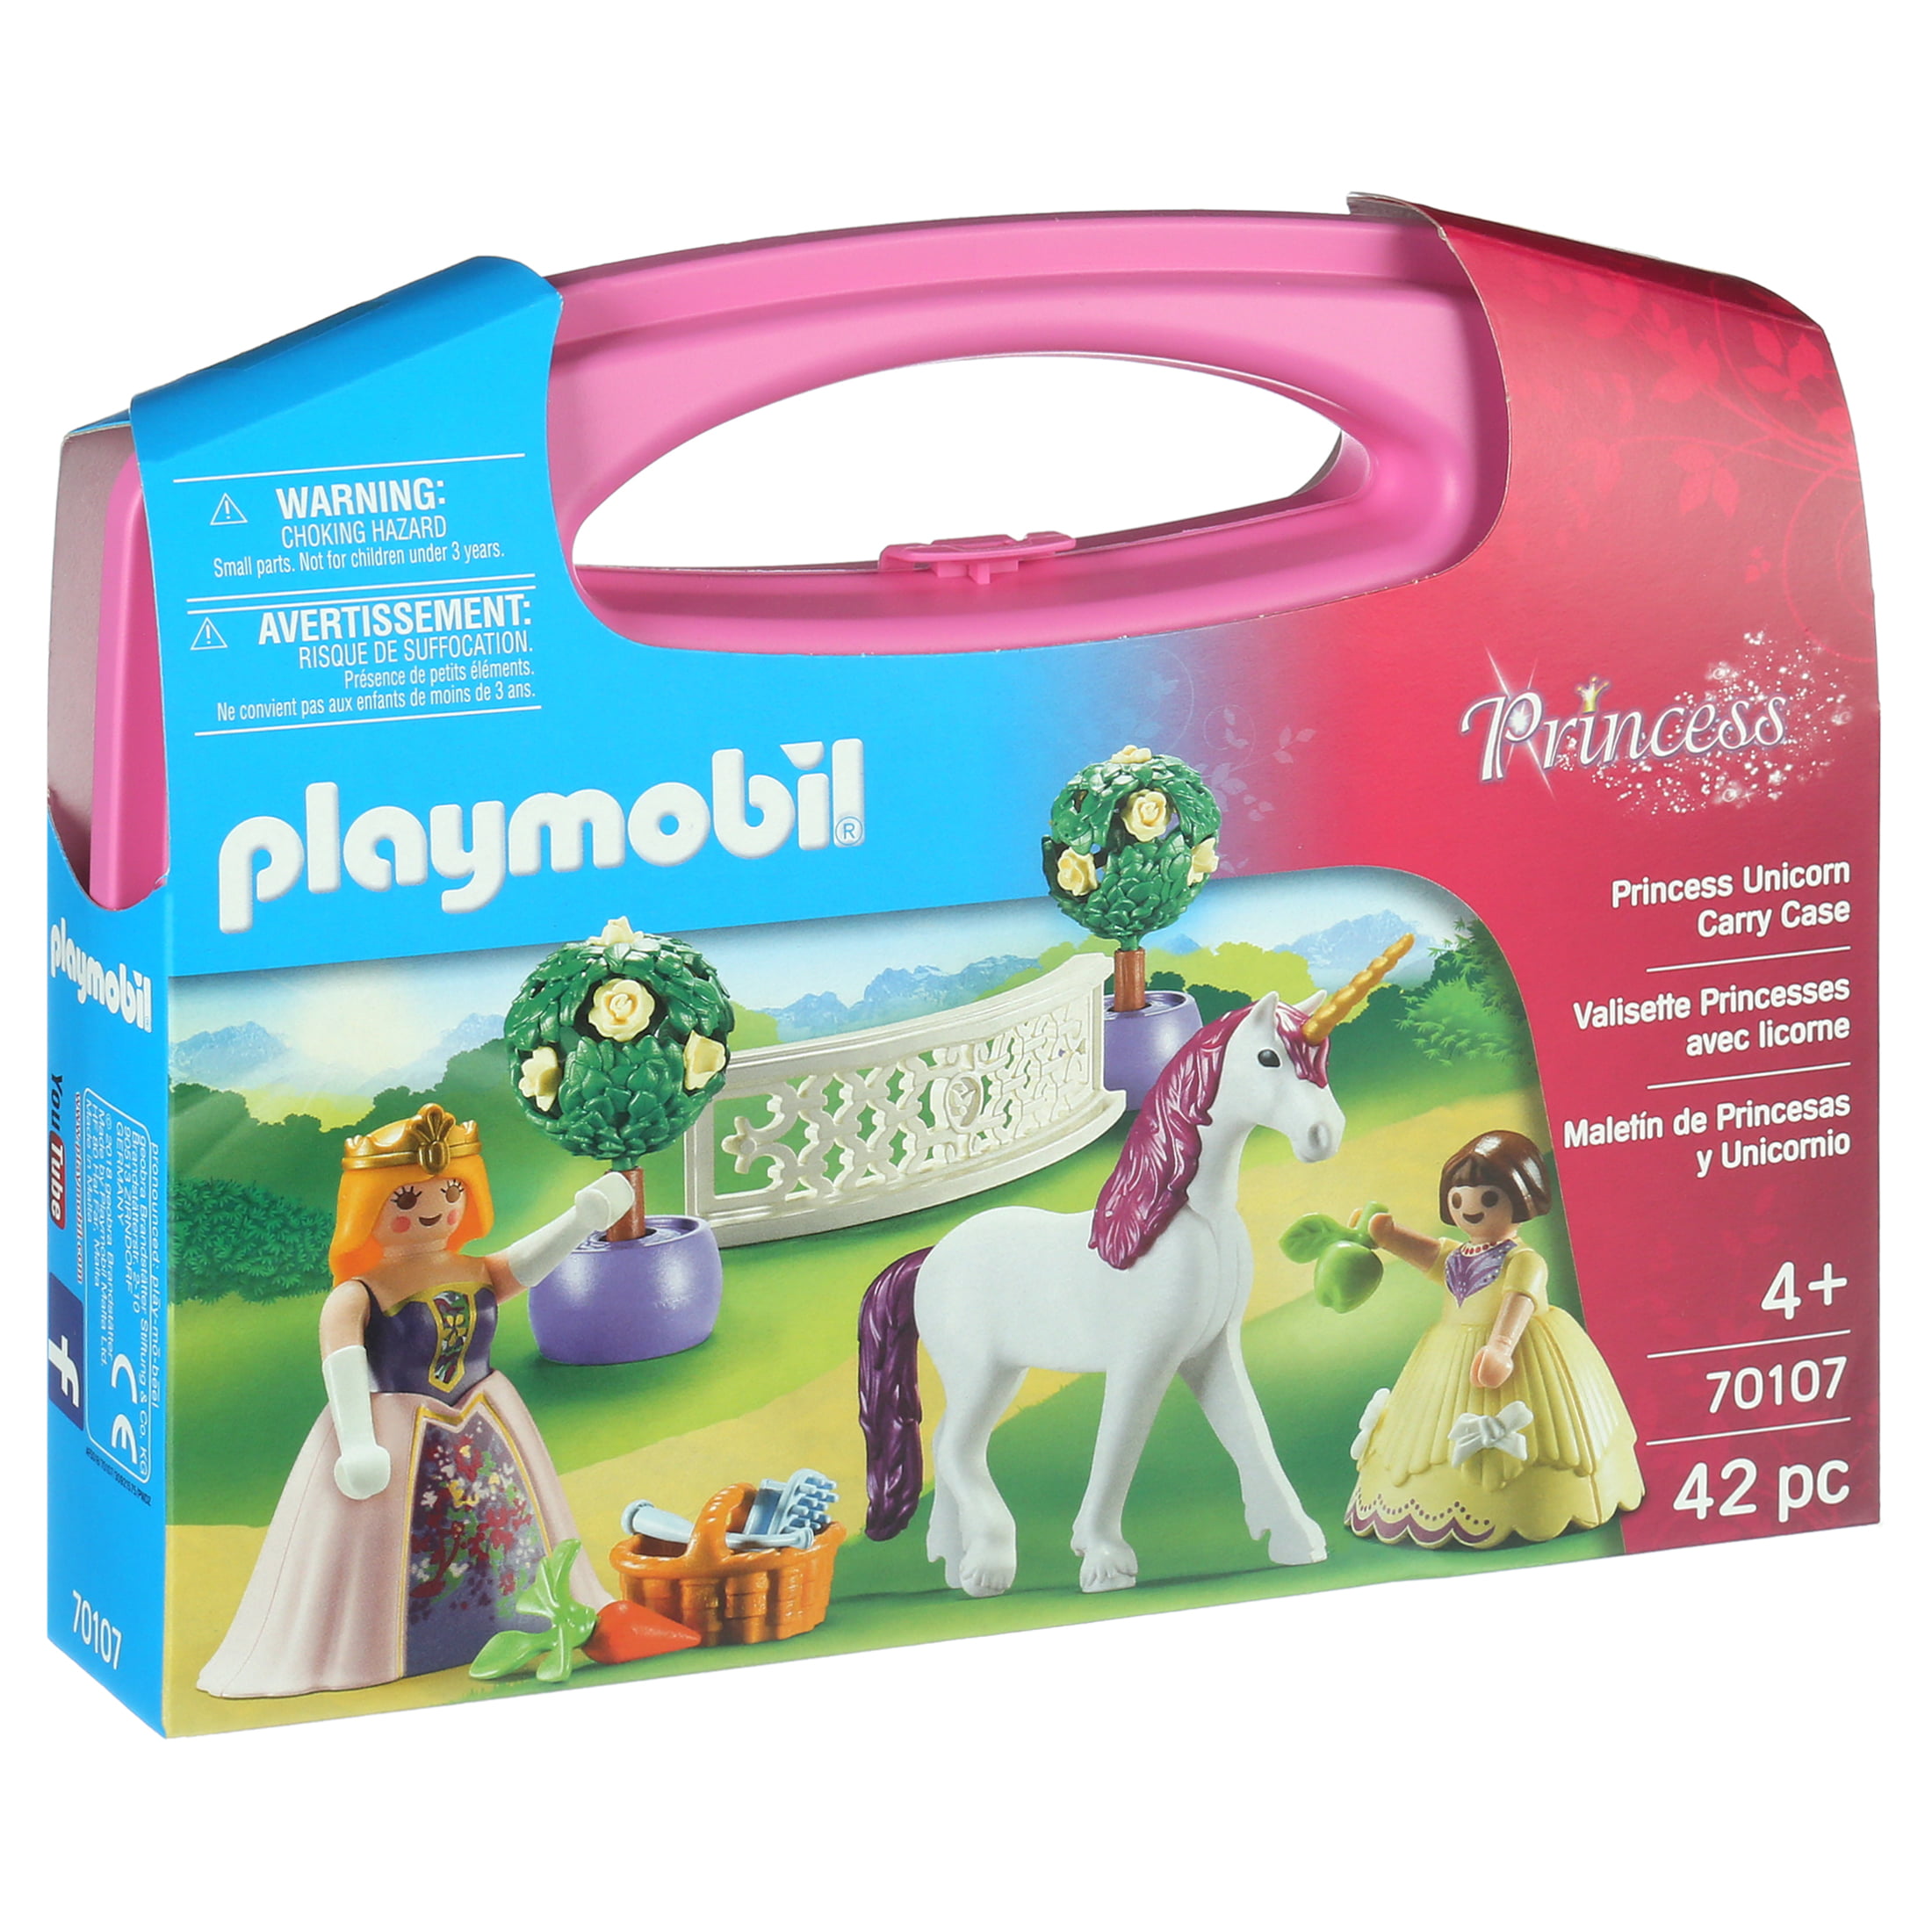 Playmobil Princess Unicorn Carry Case - A2Z Science & Learning Toy